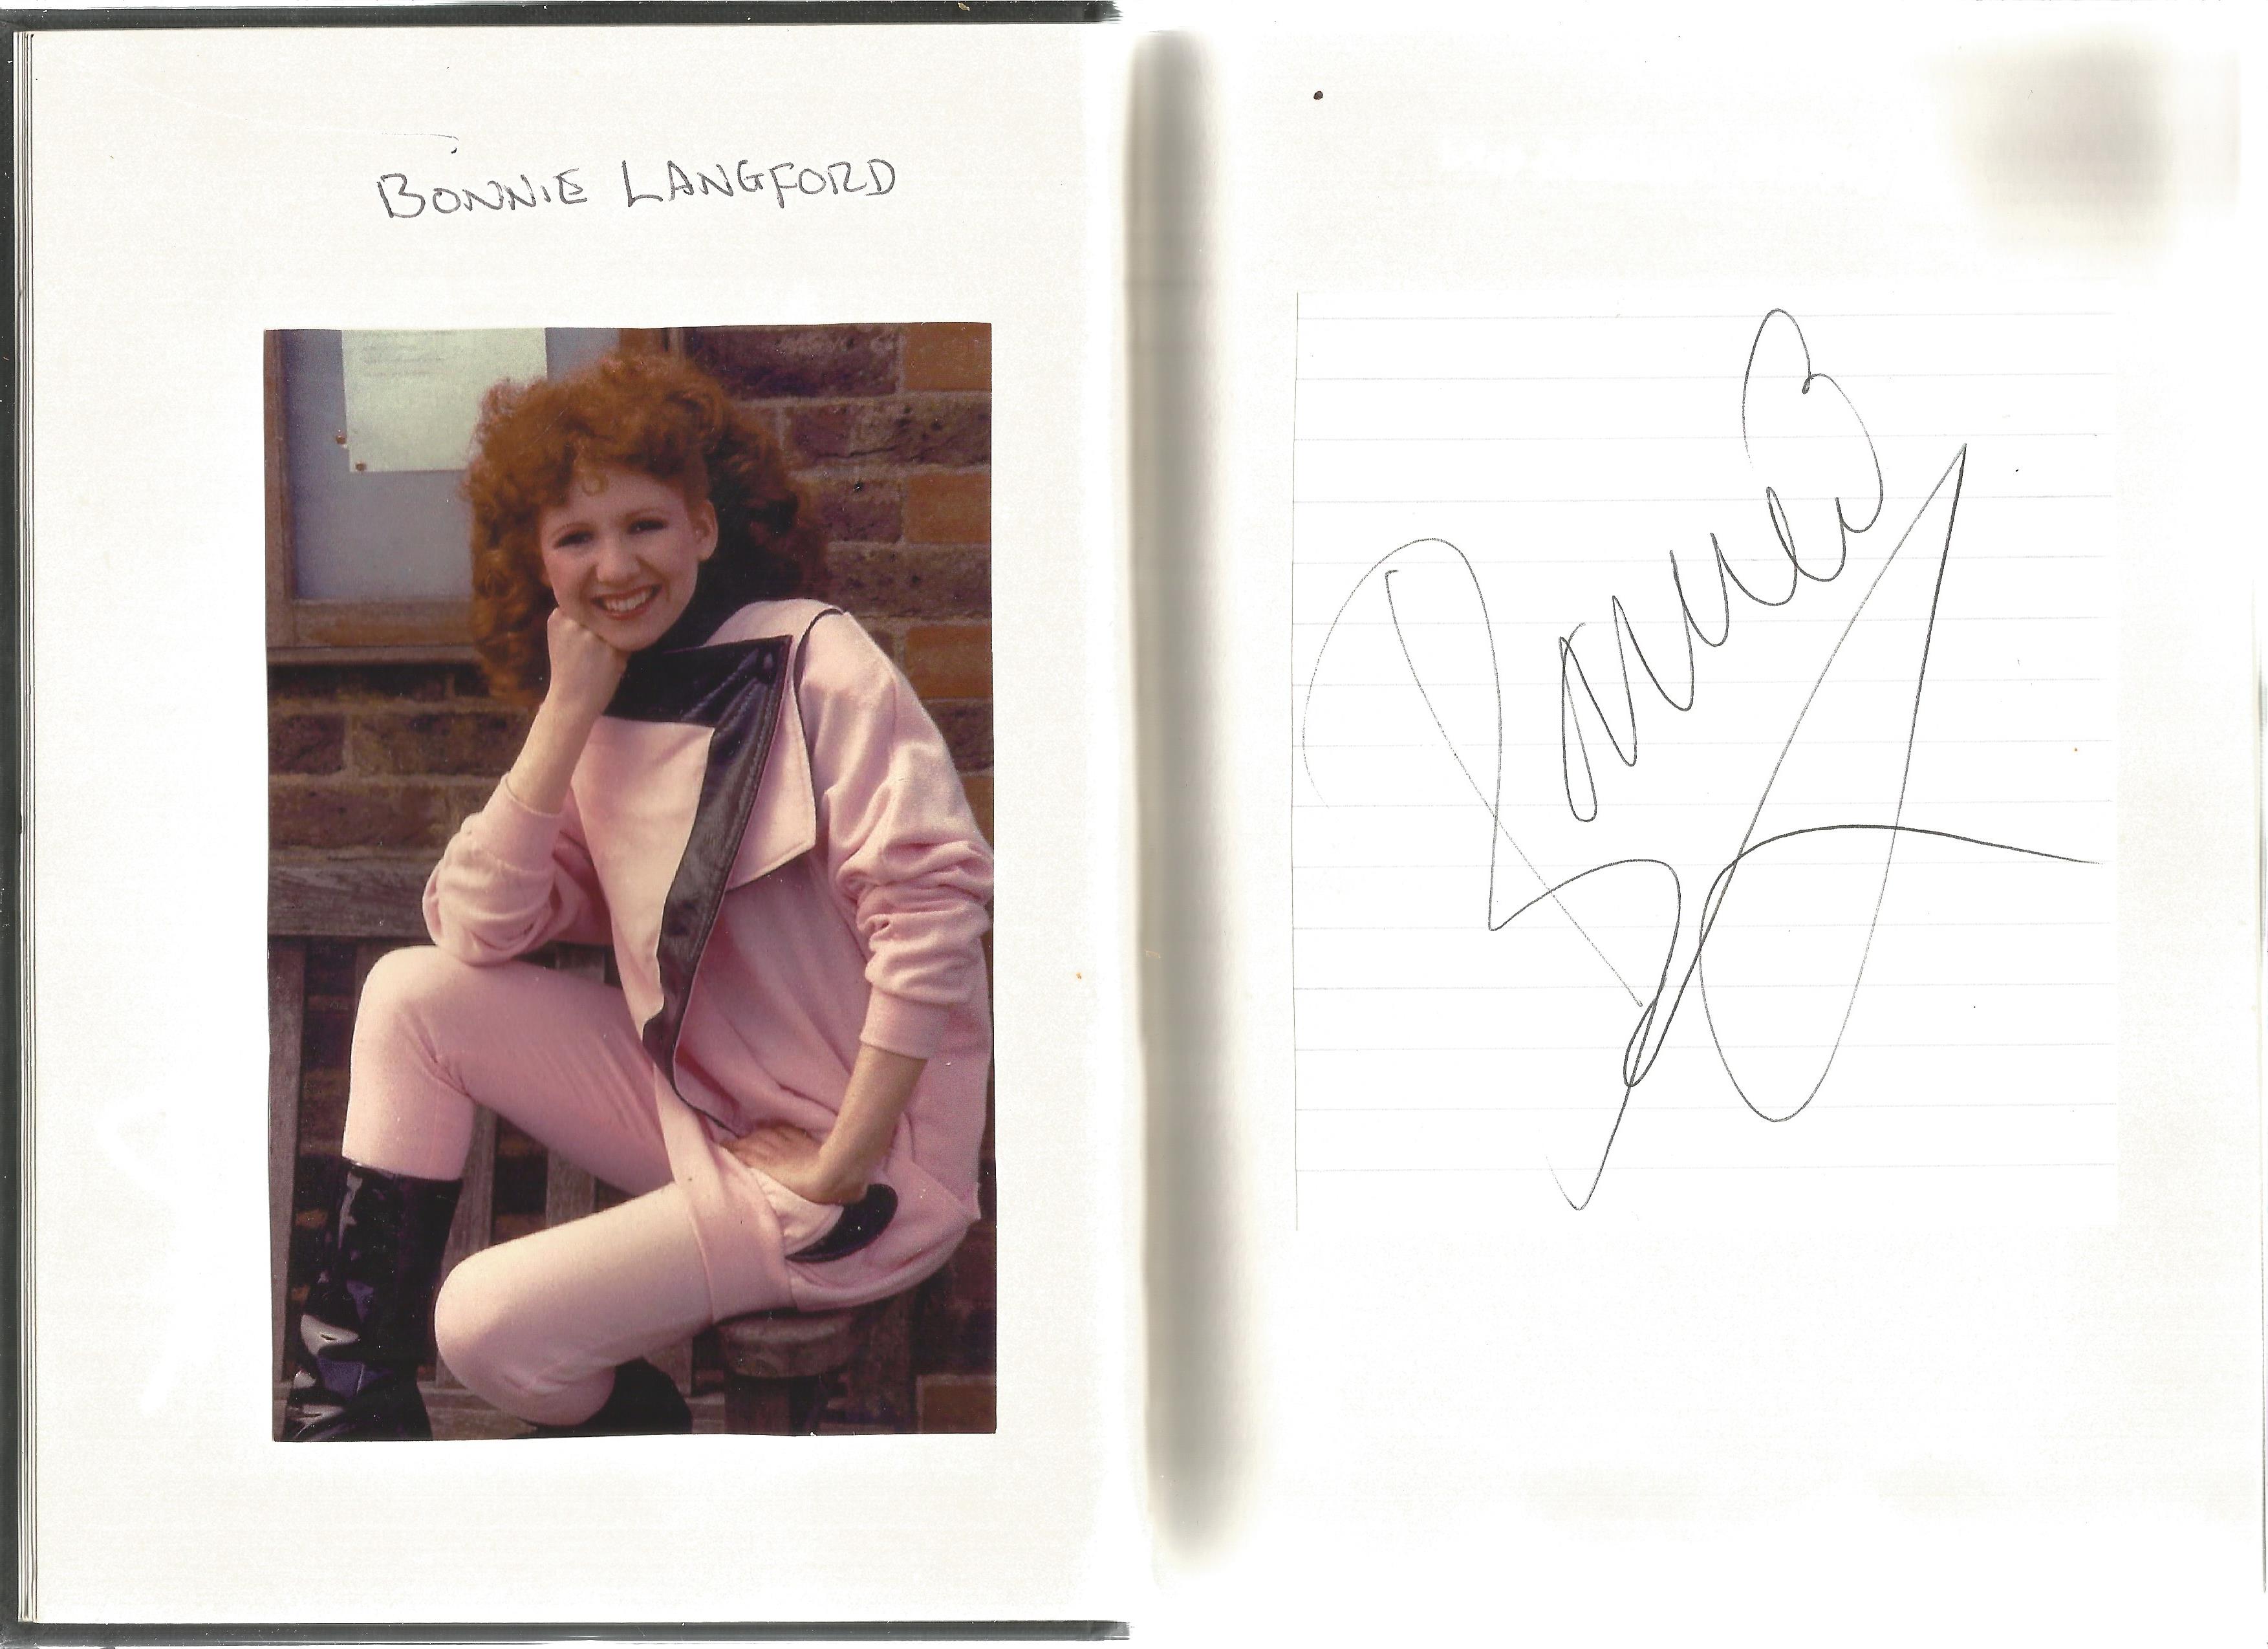 Autograph book with 50+ signatures on 8x6 pages. Some of signatures included are Tom Conti, Royce - Image 5 of 6